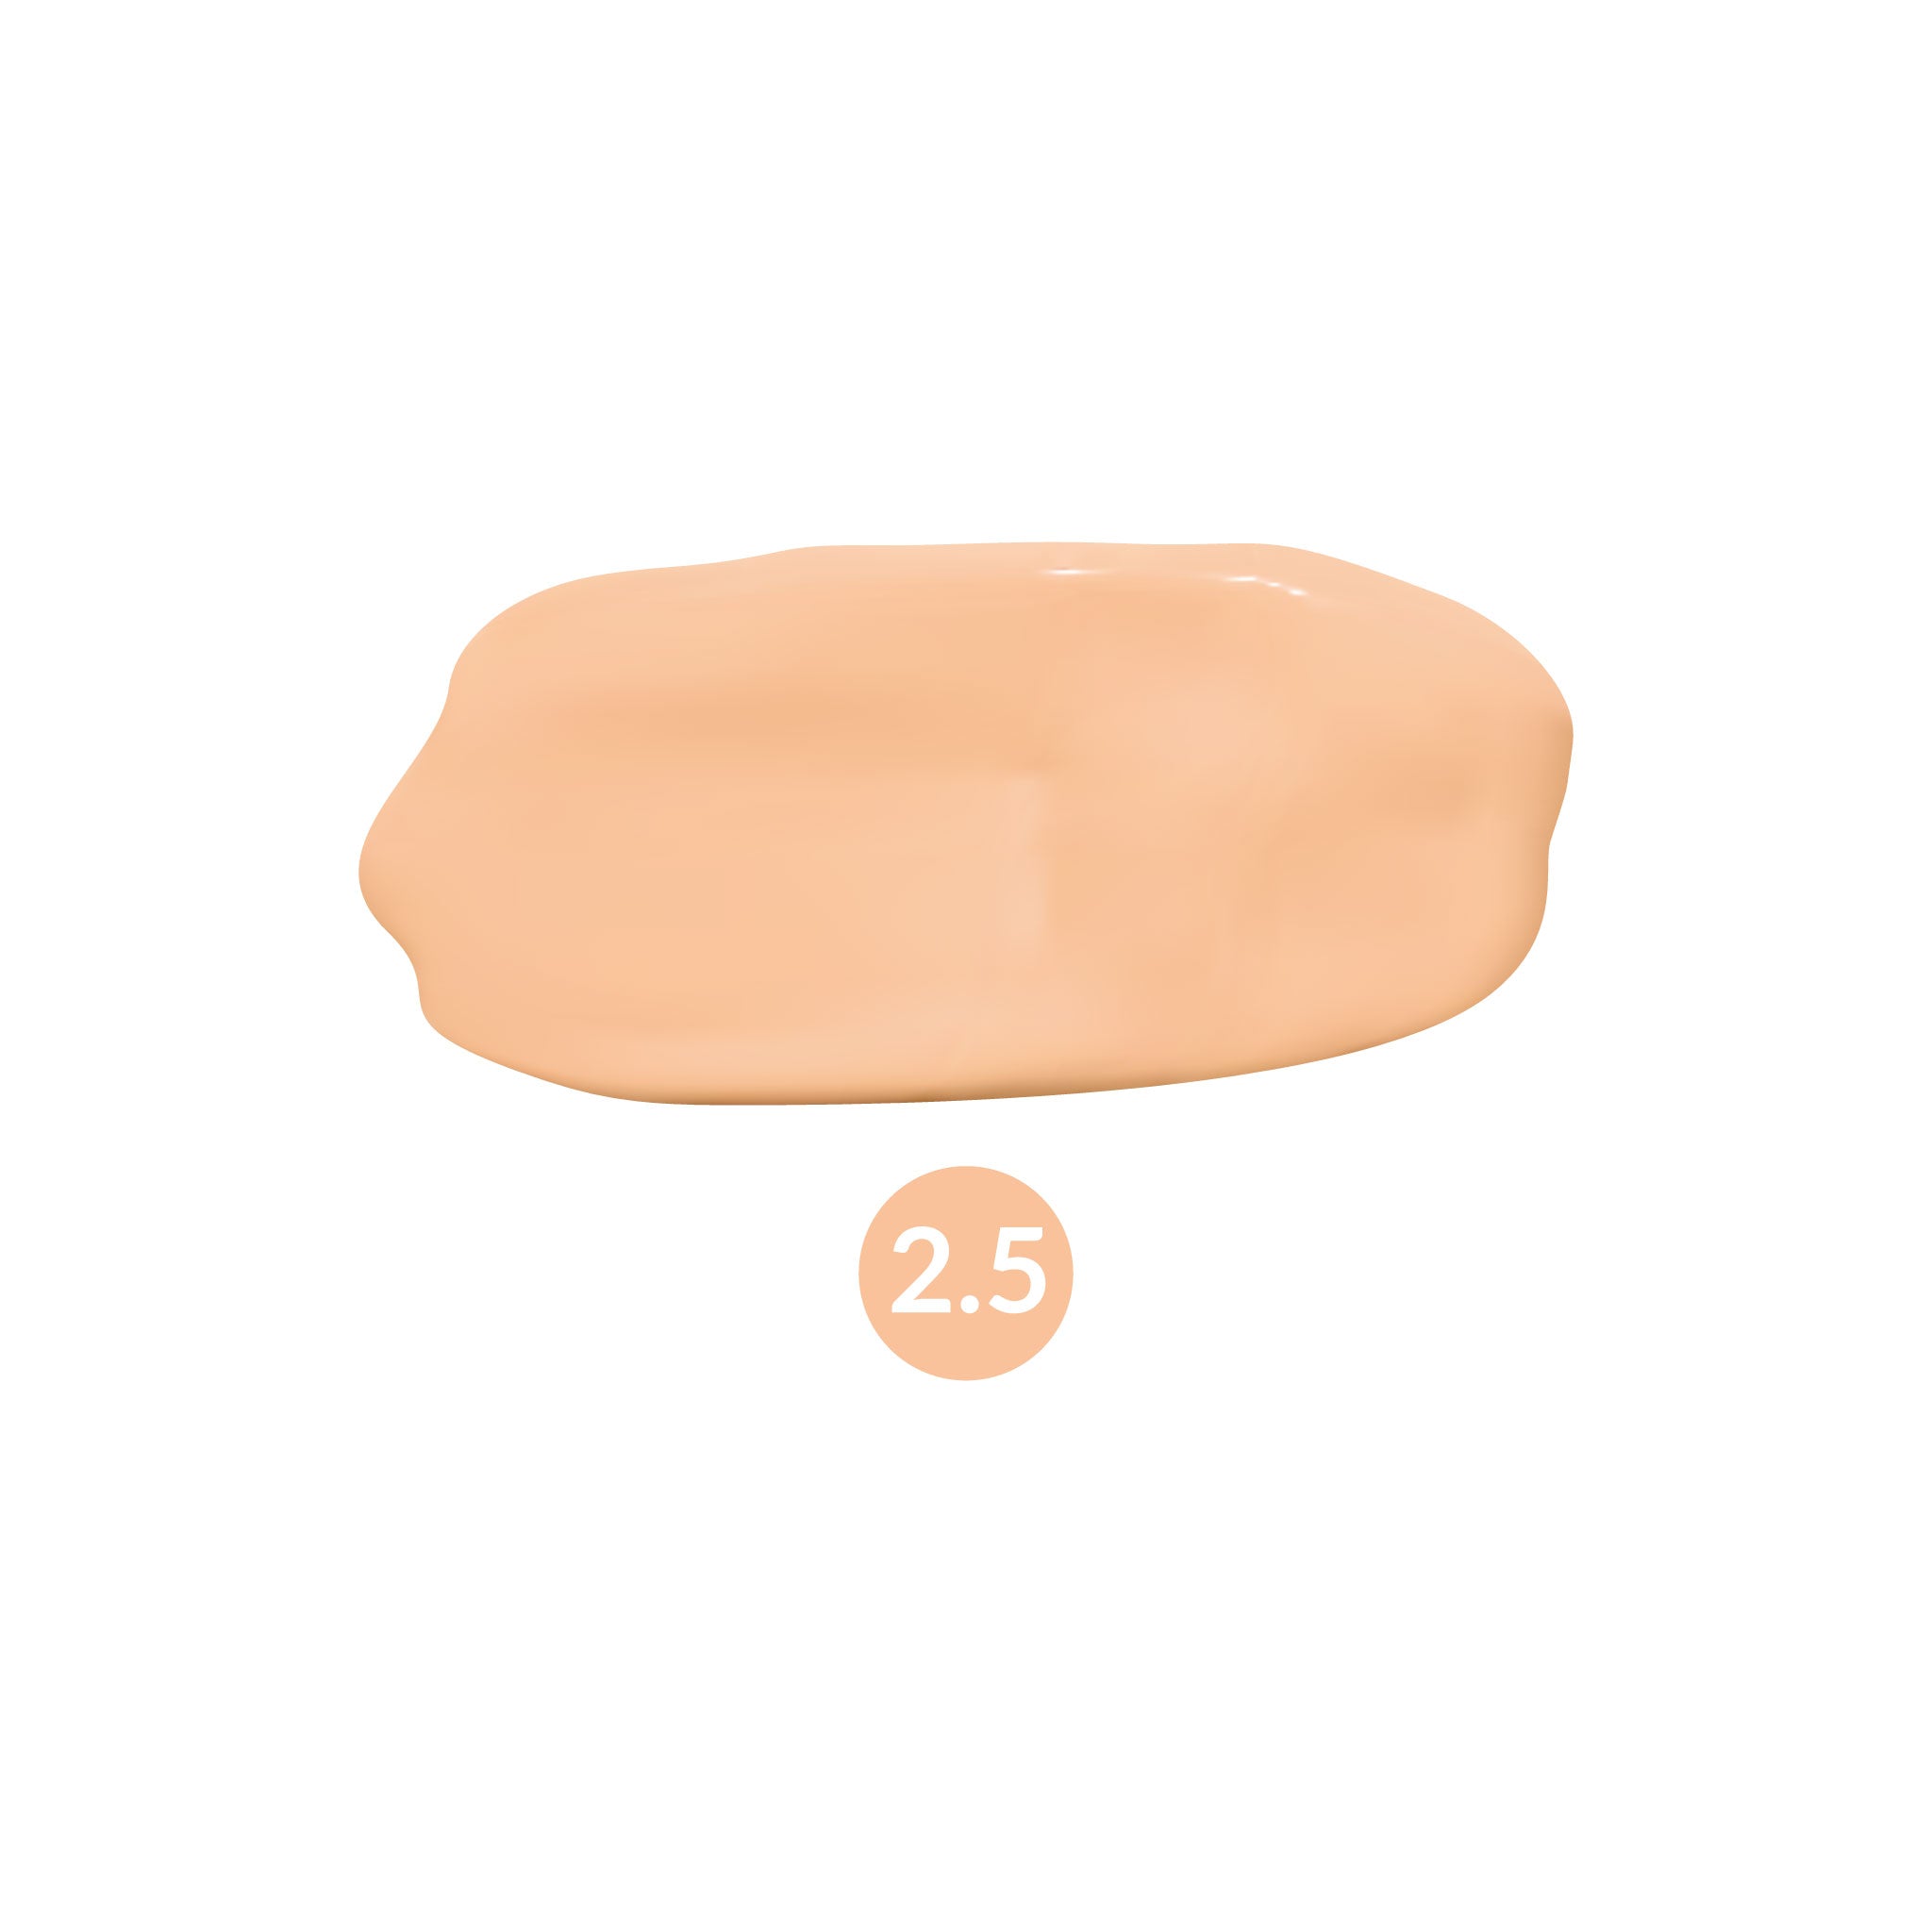 withSimplicity Liquid Foundation Swatch Shade 2.5